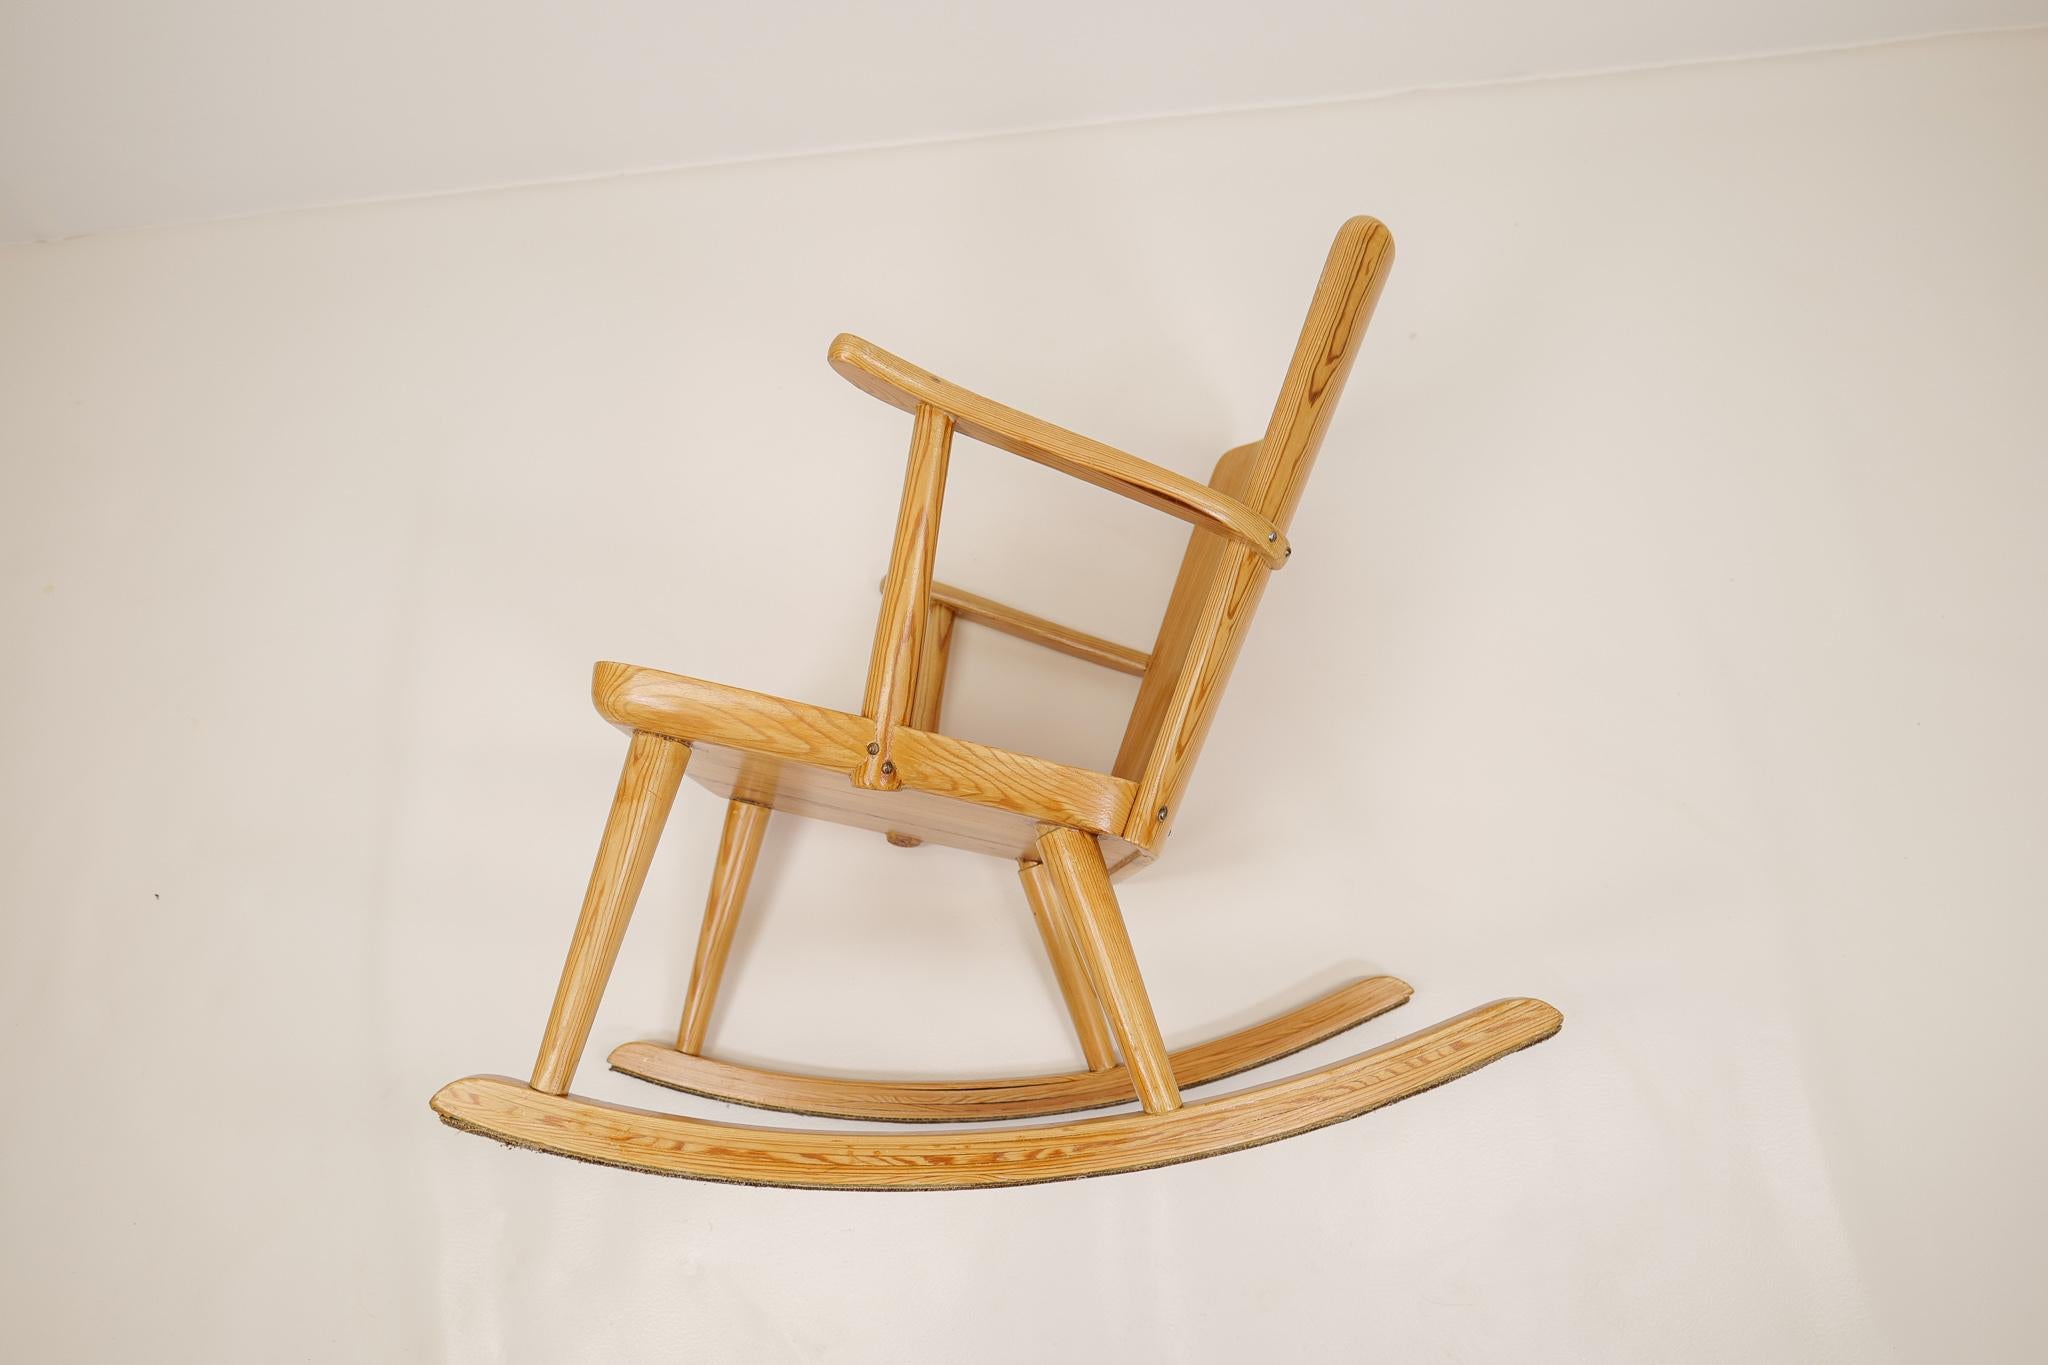 Midcentury Rocking Chair in Pine, Göran Malmvall, Sweden, 1940s For Sale 6